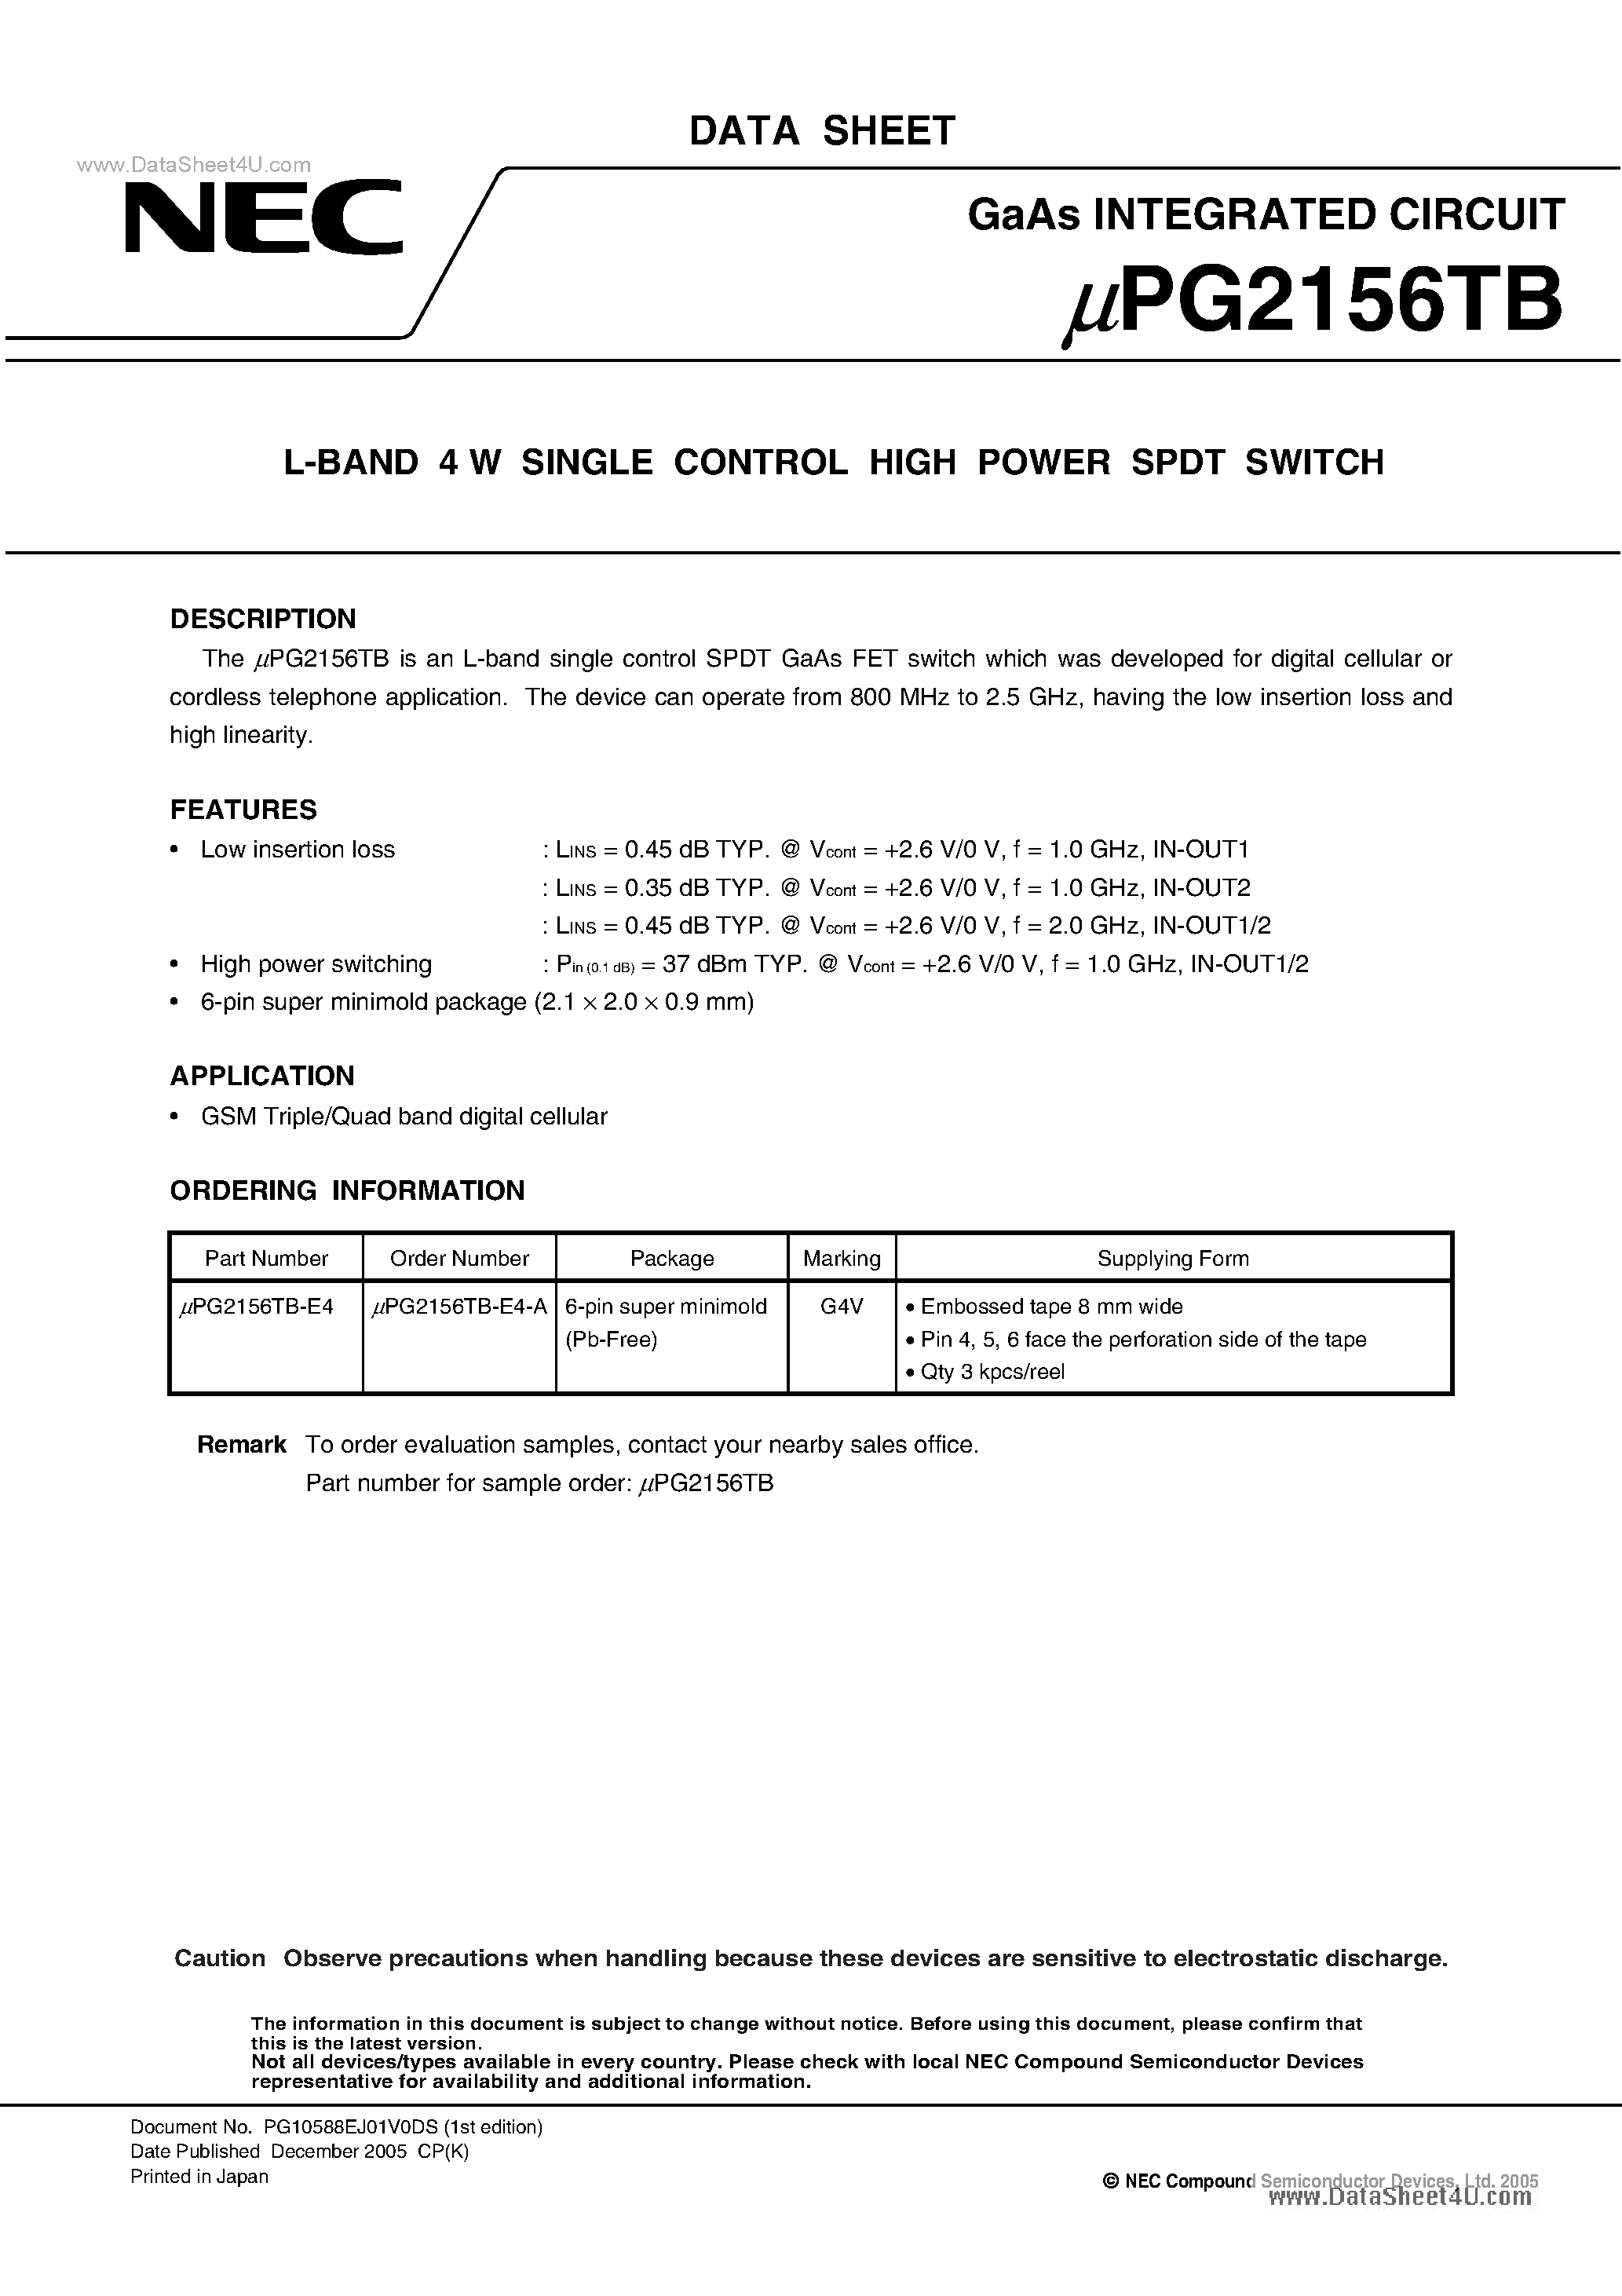 Datasheet UPG2156TB - L-BAND 4 W SINGLE CONTROL HIGH POWER SPDT SWITCH page 1